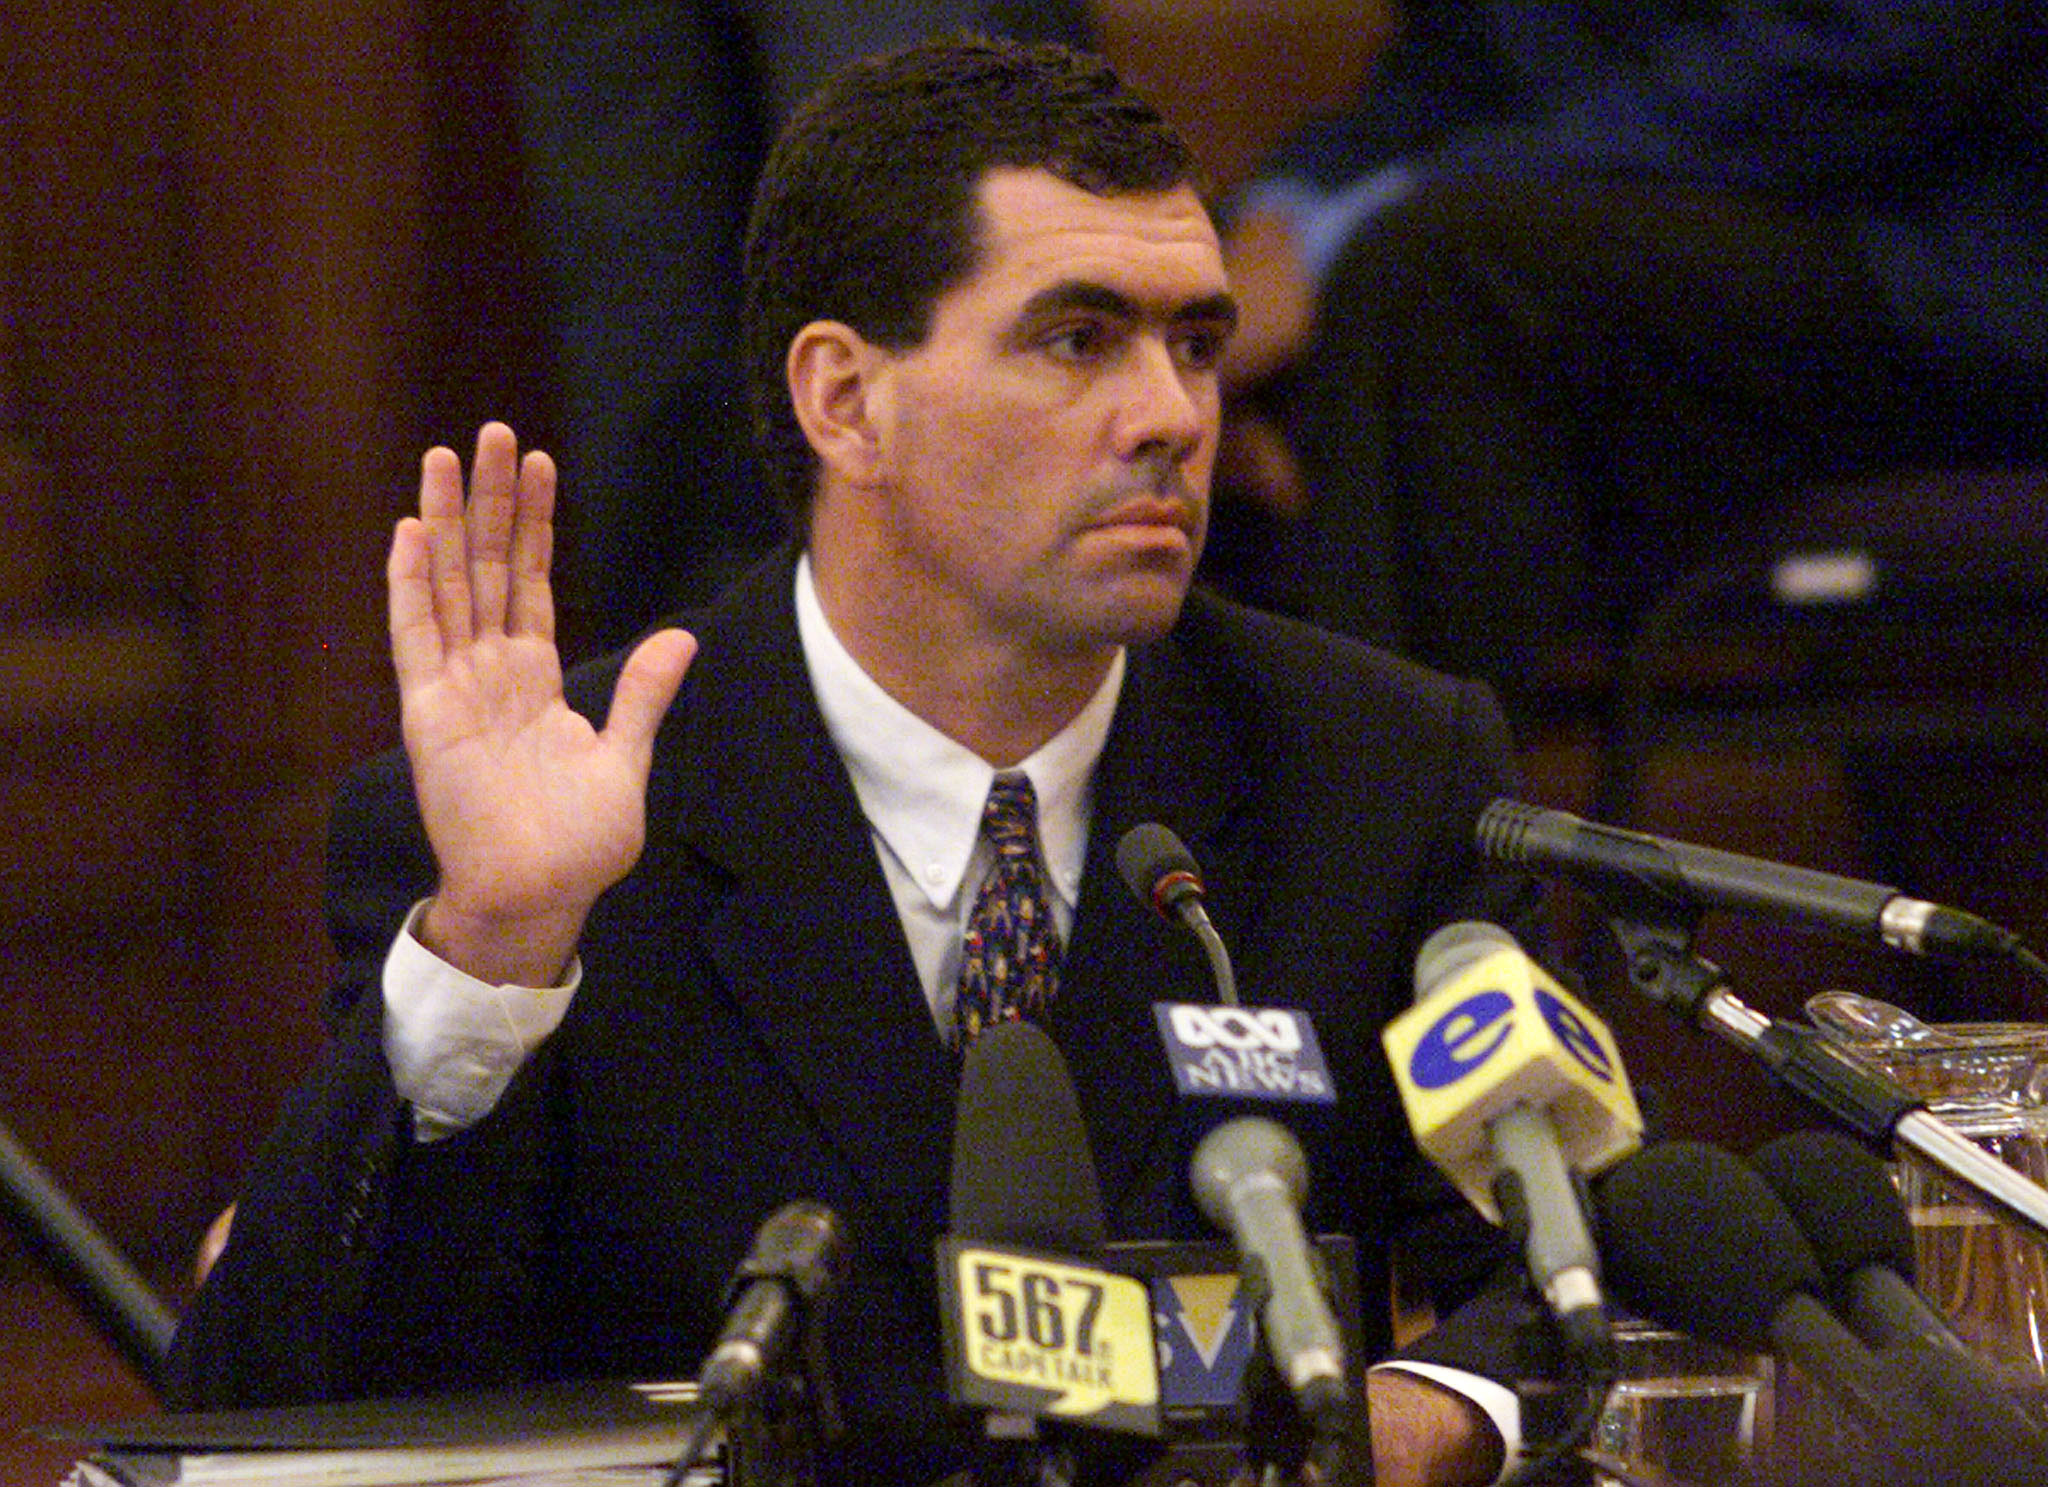 FILE PHOTO: Disgraced former South African cricket captain Hansie Cronje is sworn in to testify at the King Commission of Inquiry into allegations of match fixing in South African cricket, June 15, 2000. Photo: Reuters